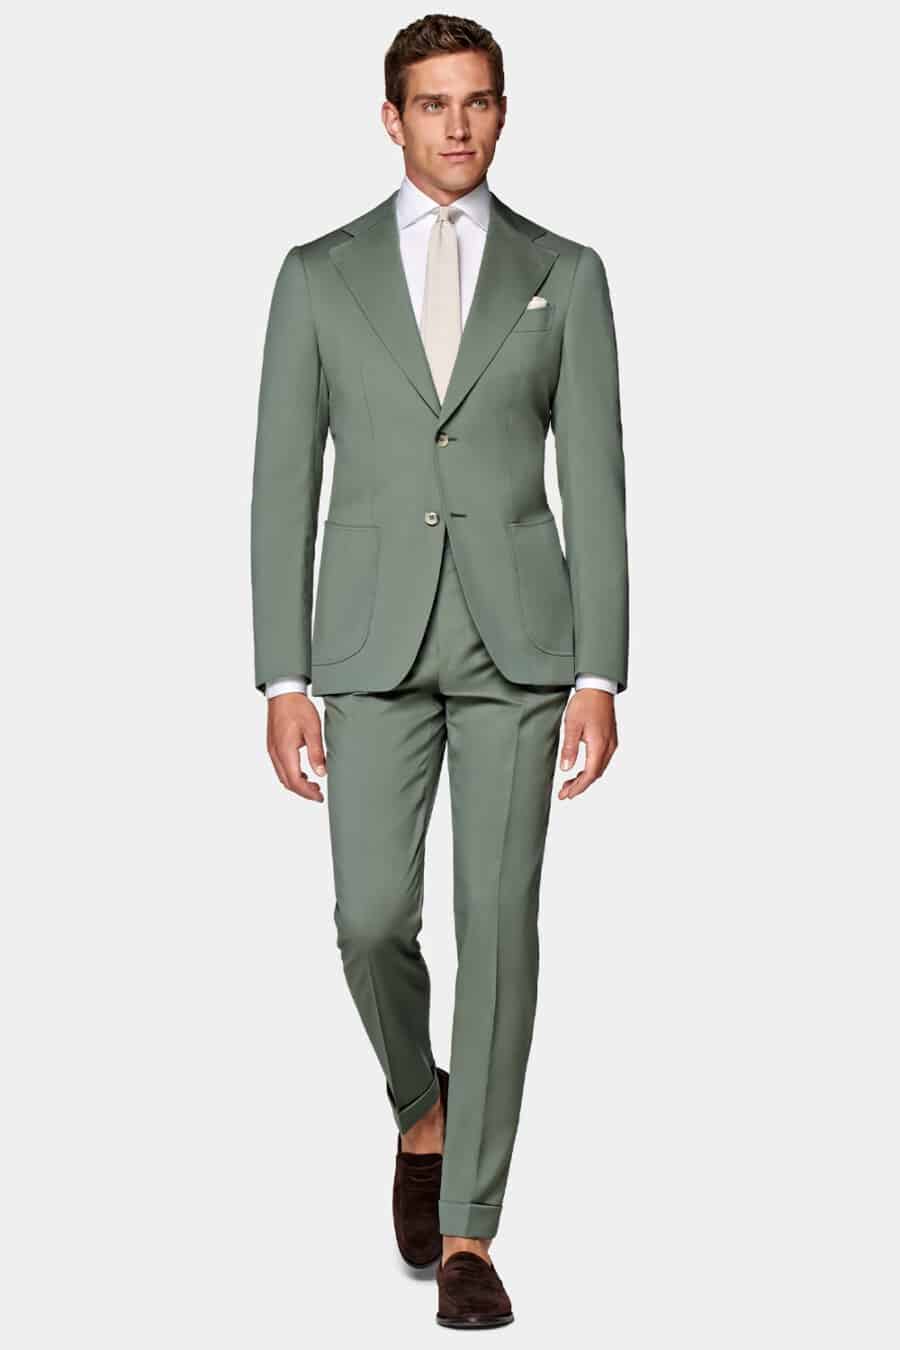 Men's light green suit, white dress shirt, off-white tie and dark brown suede penny loafers outfit